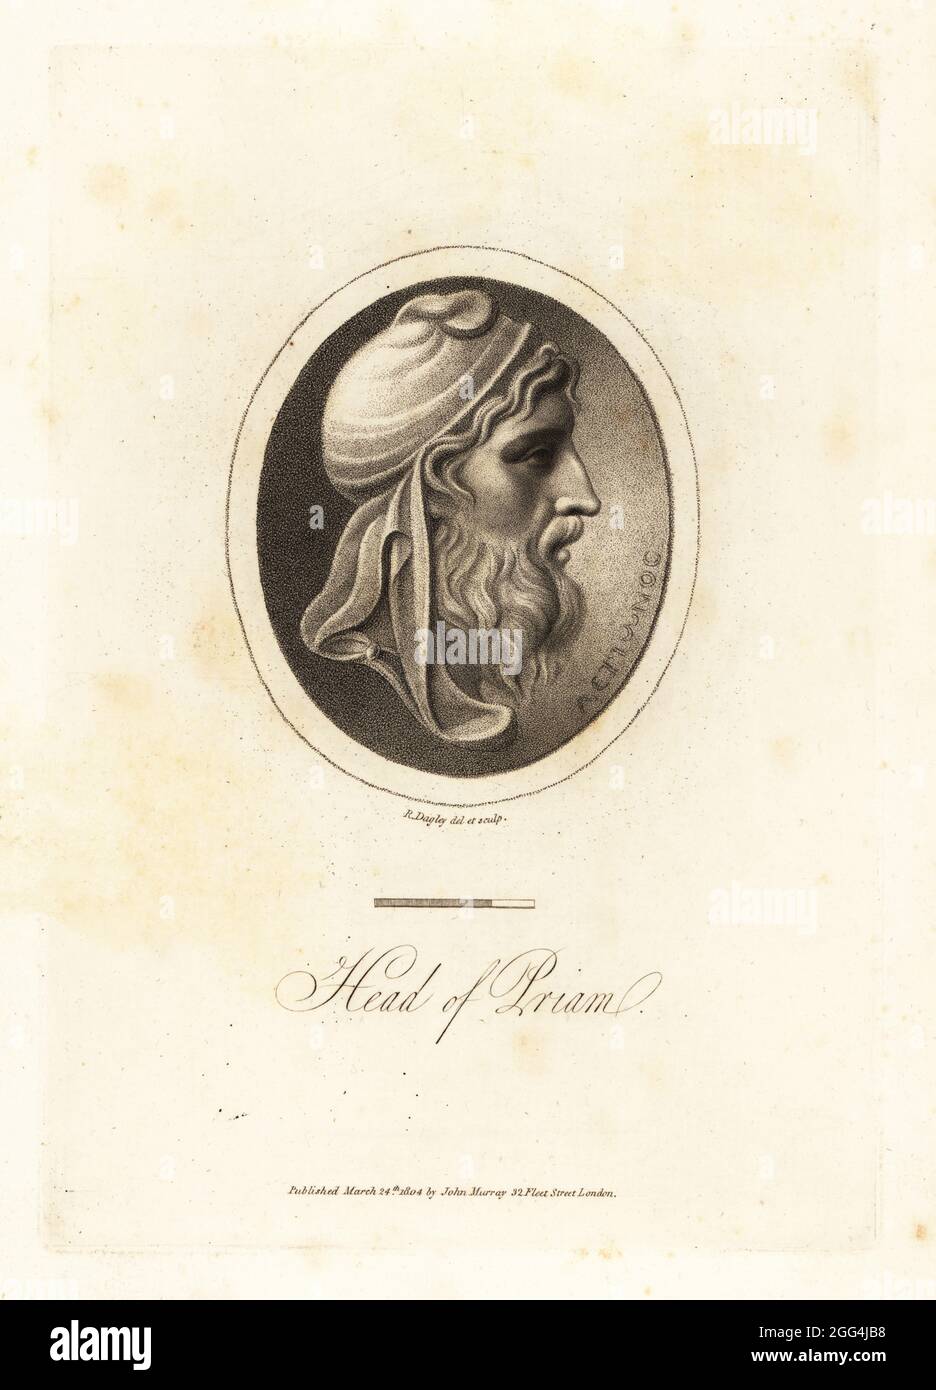 Profile bust of Priam, King of Troy. during the Trojan War. He wears a Phrygian cap. Head of Priam. From a gem in the possession of the Duke of Devonshire. Copperplate engraving drawn and engraved by Richard Dagley from Gems, Selected from the Antique, with Illustrations, John Murray, London, 1804. Stock Photo